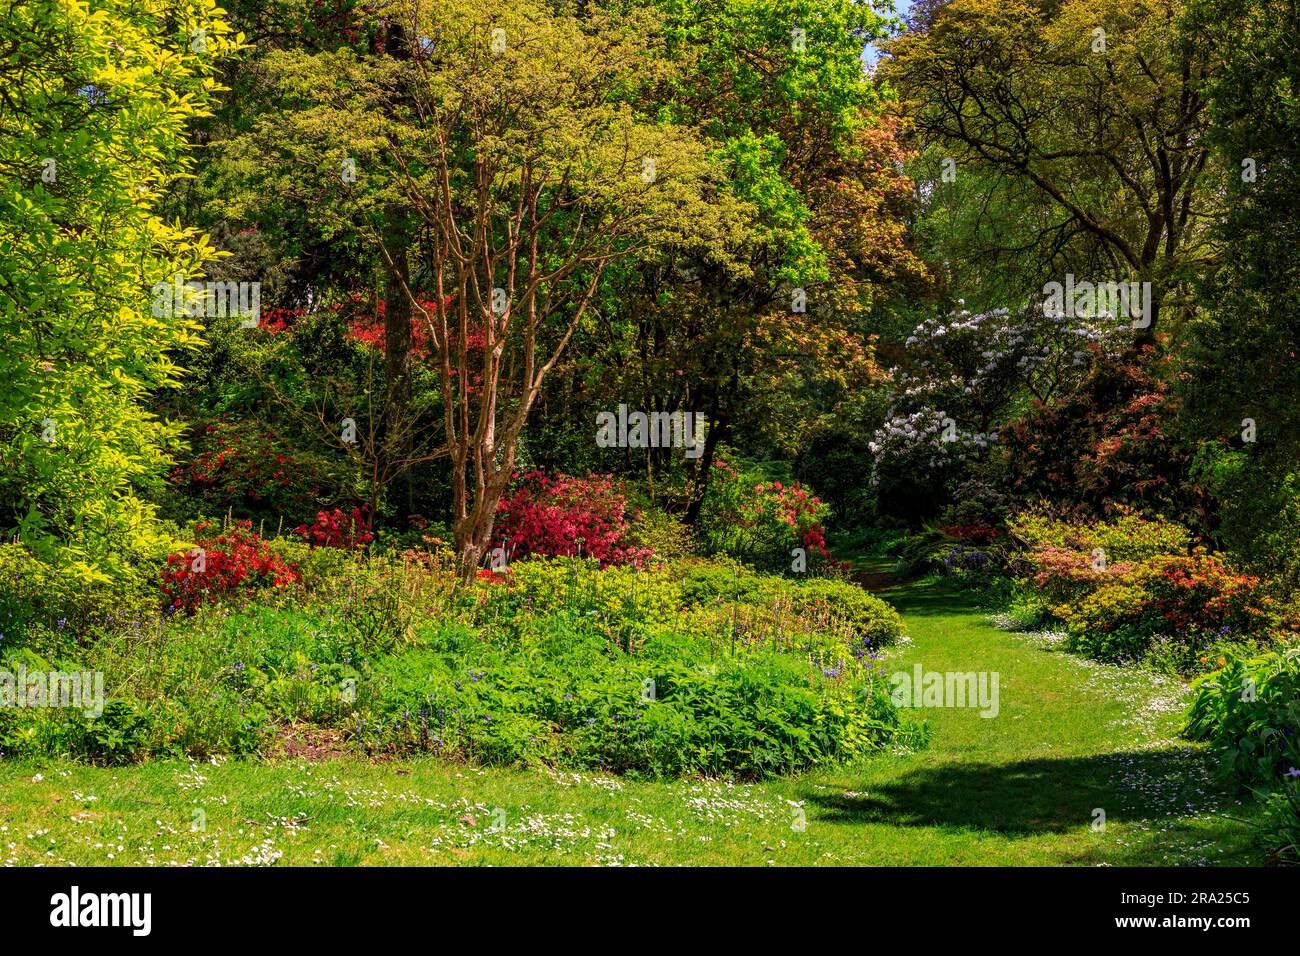 Colourful flowers of azaleas and rhododendrons in the woodlands at Knightshayes Court, nr Tiverton, Devon, England, UK Stock Photo